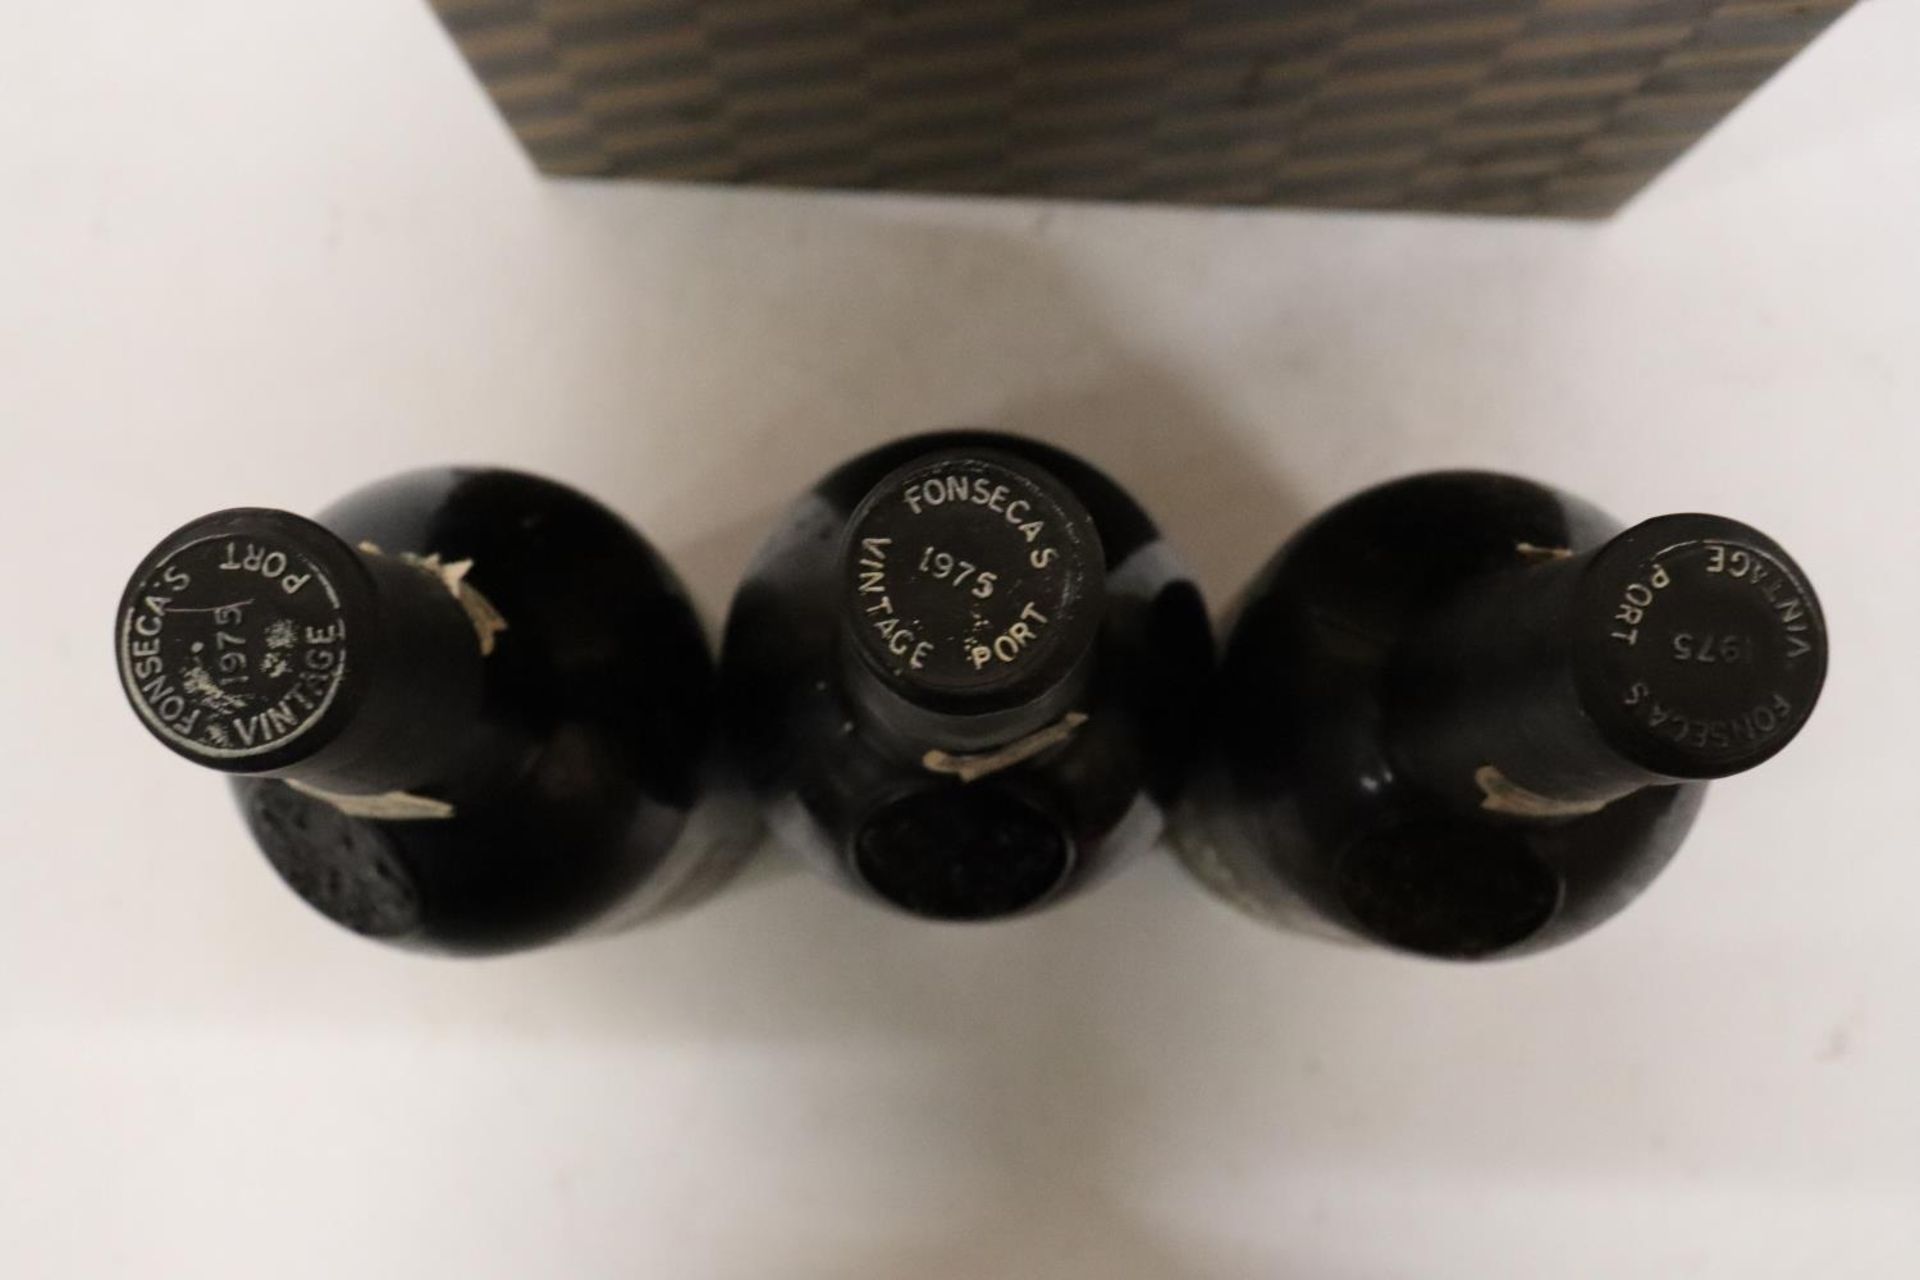 THREE BOTTLES OF FONSECAS 1975 VINTAGE PORT IN A BOX - Image 3 of 5